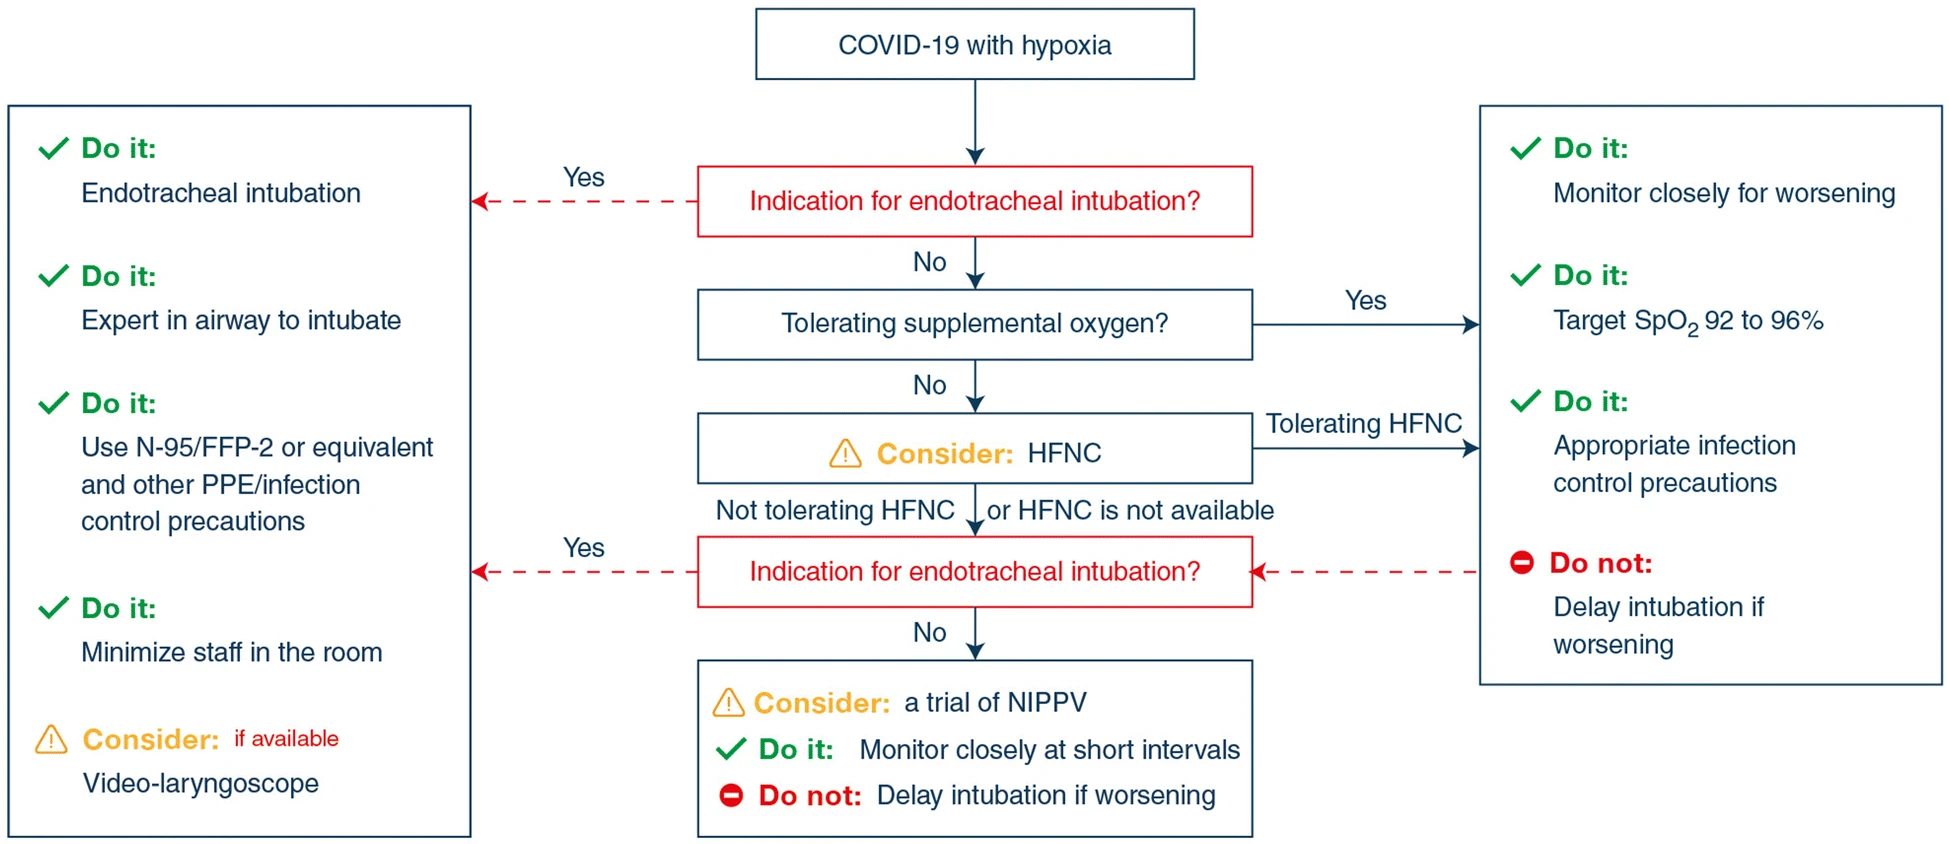 Summary of recommendations on the initial management of hypoxic COVID-19 patients